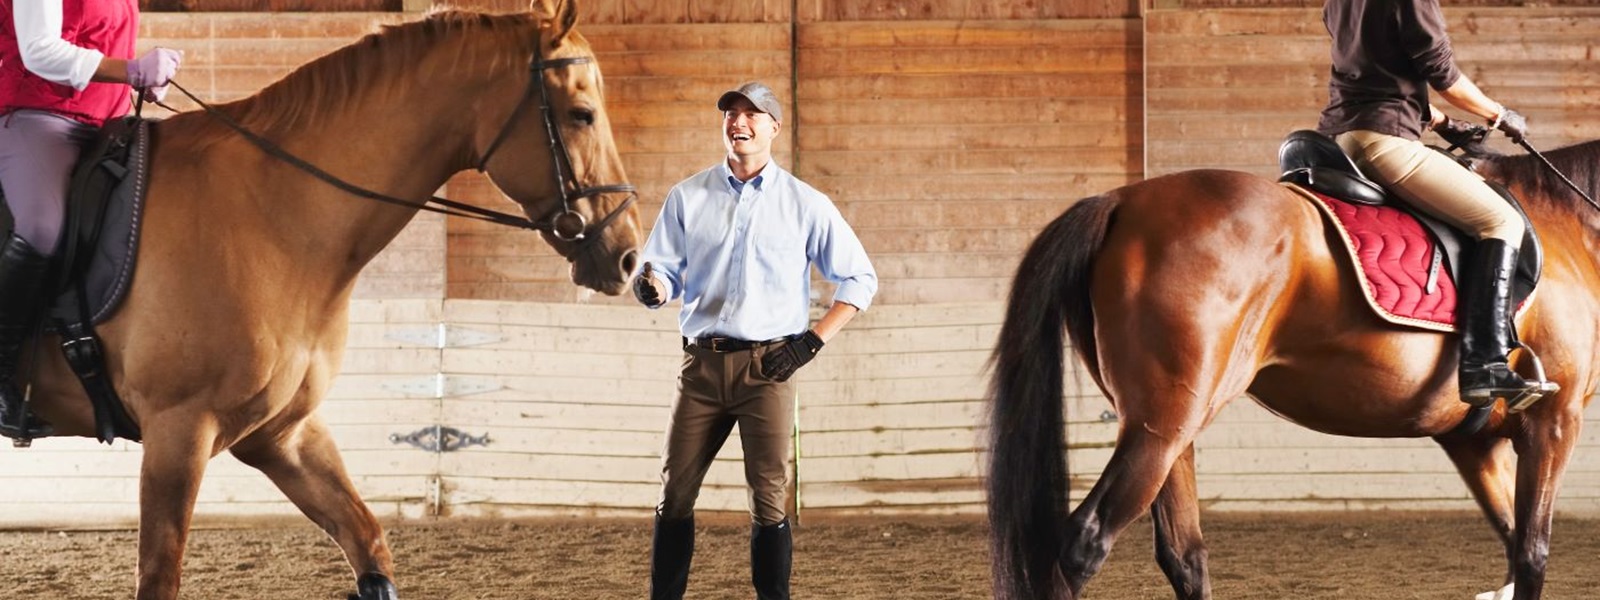 Trainer encourages two students on horseback in a barn